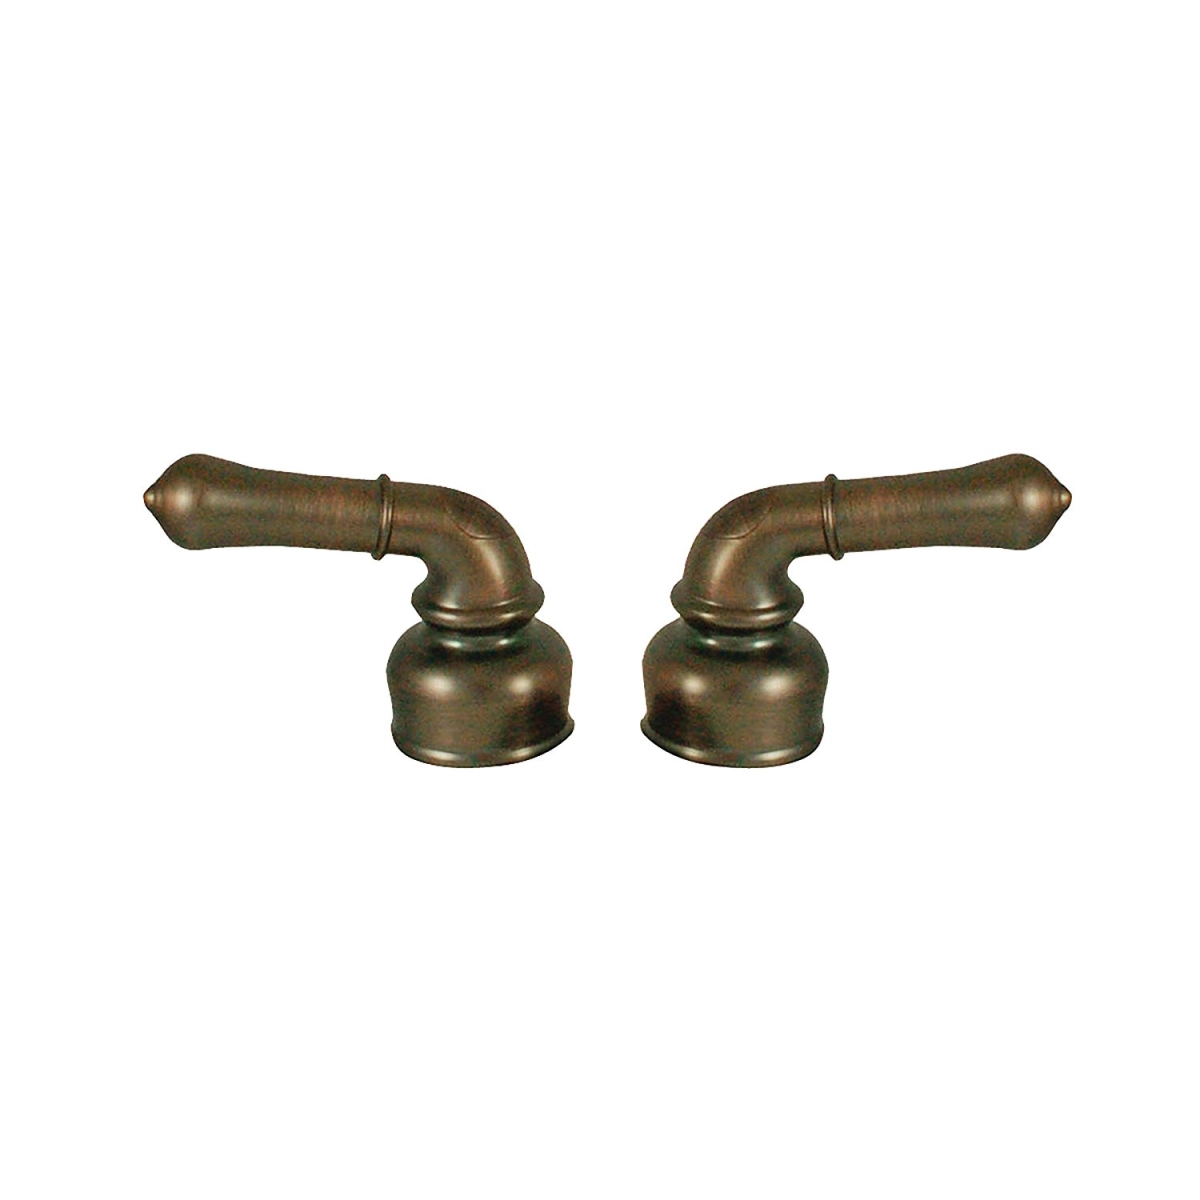 A7k-ucorb Hot & Cold Handle, Rubbed Bronze